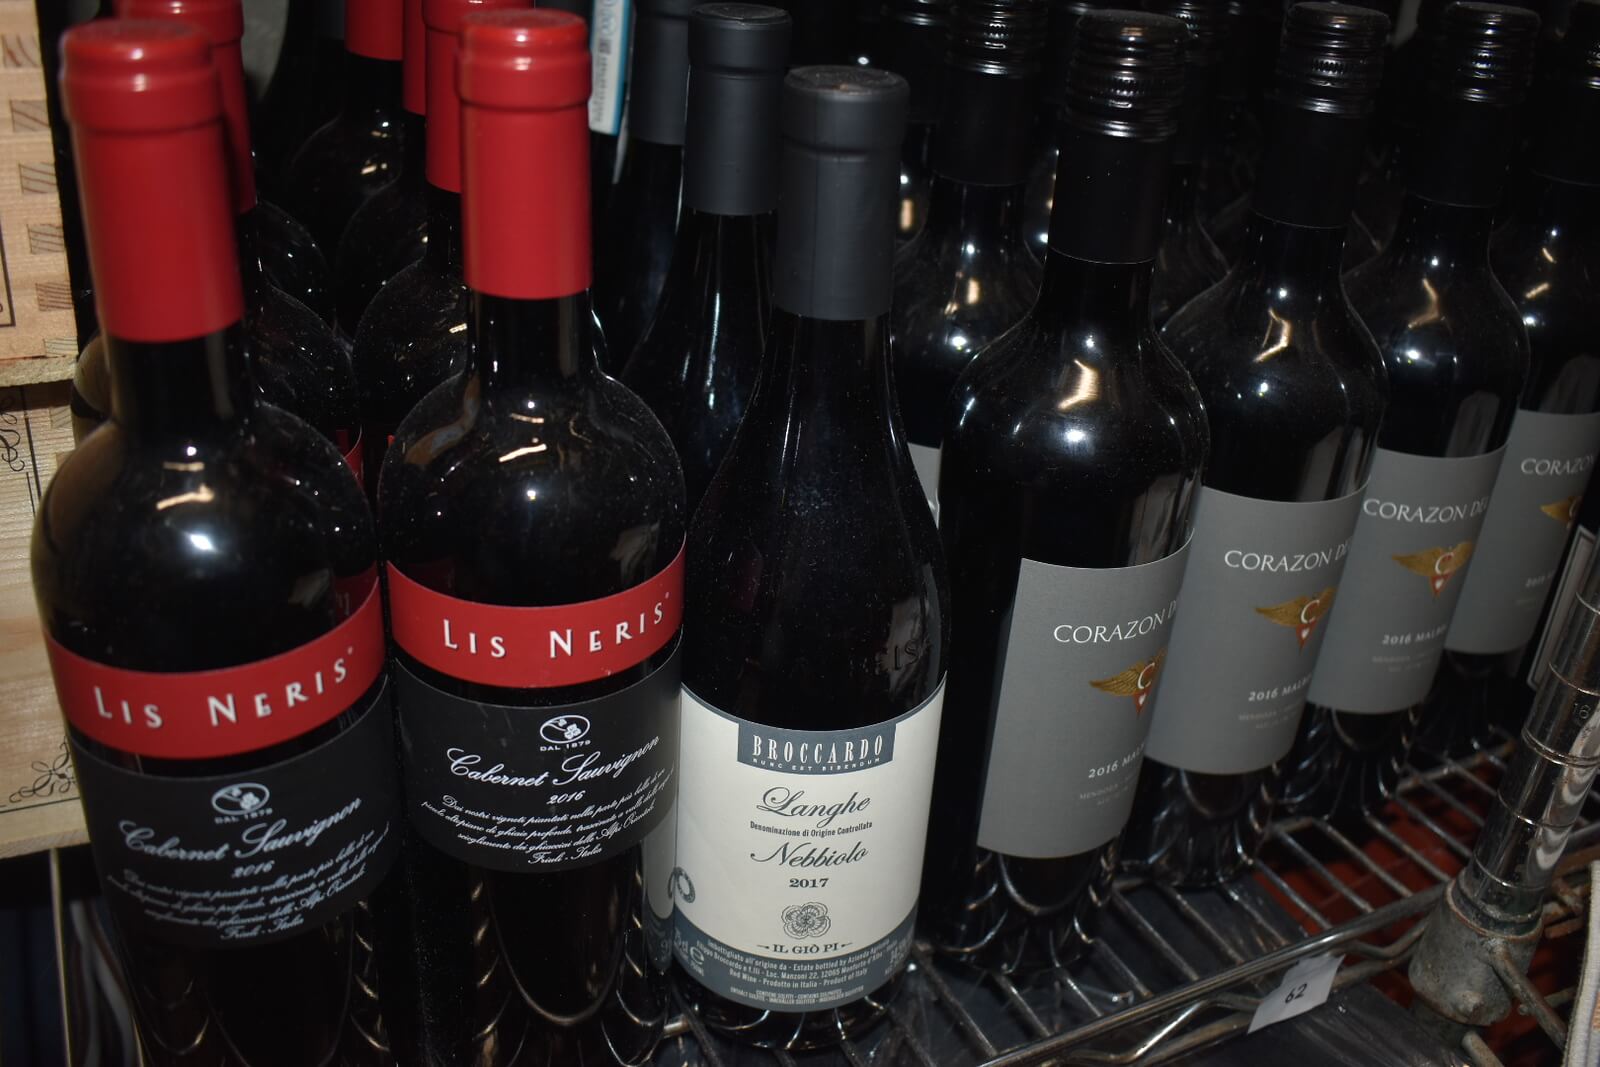 Bottles of wine available for purchase